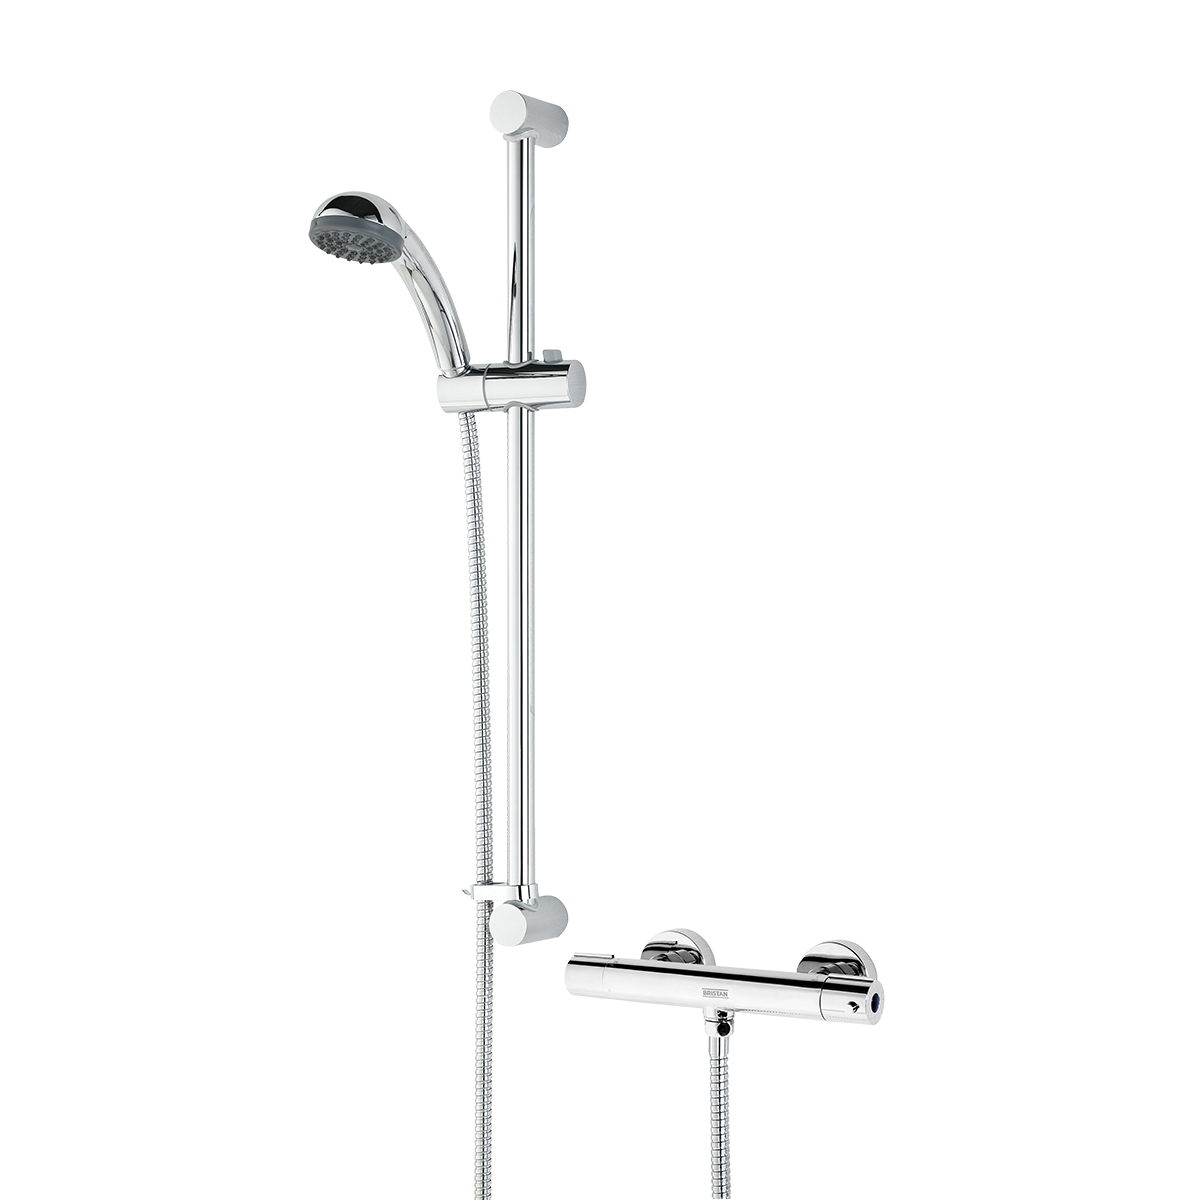 Bristan Zing Safe Touch Bar Shower With Fast Fit Connections - Chrome